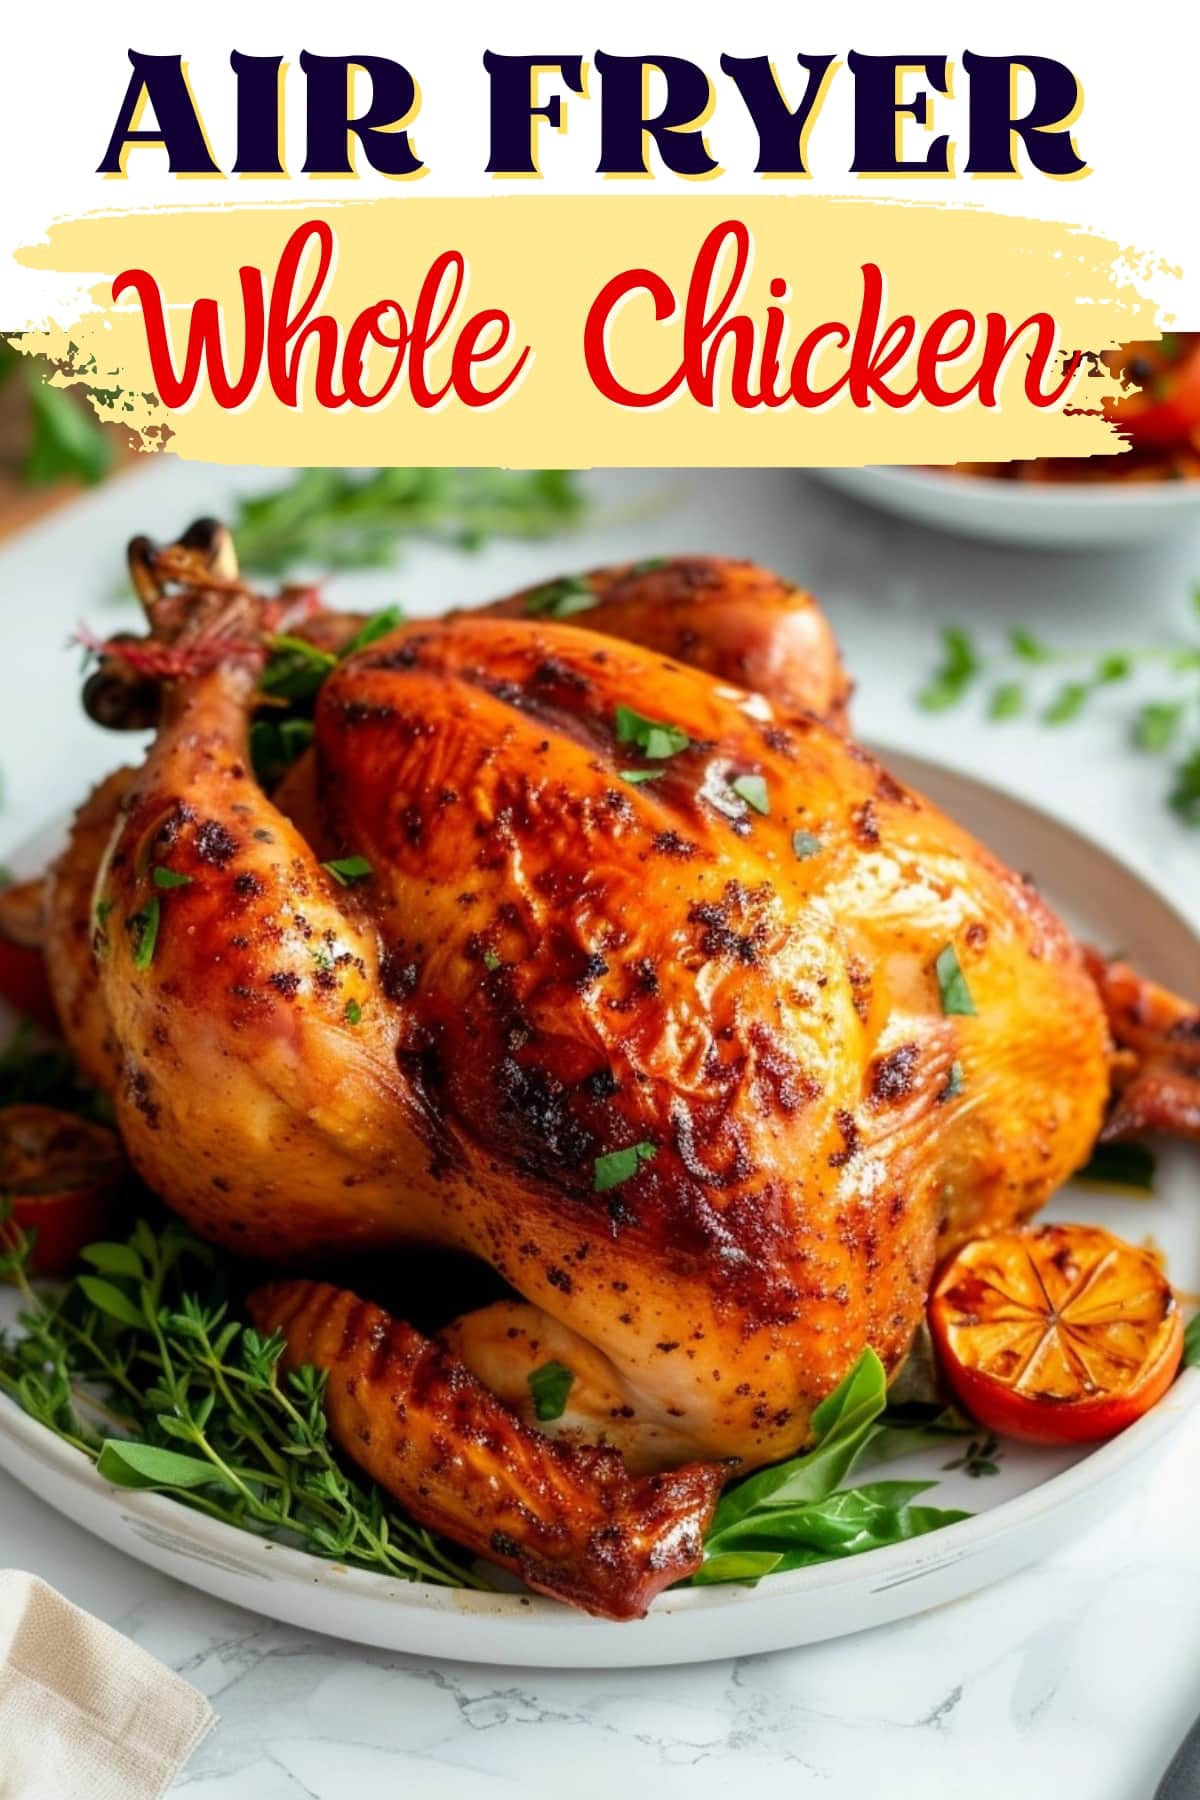 Air fryer whole chicken with herbs
